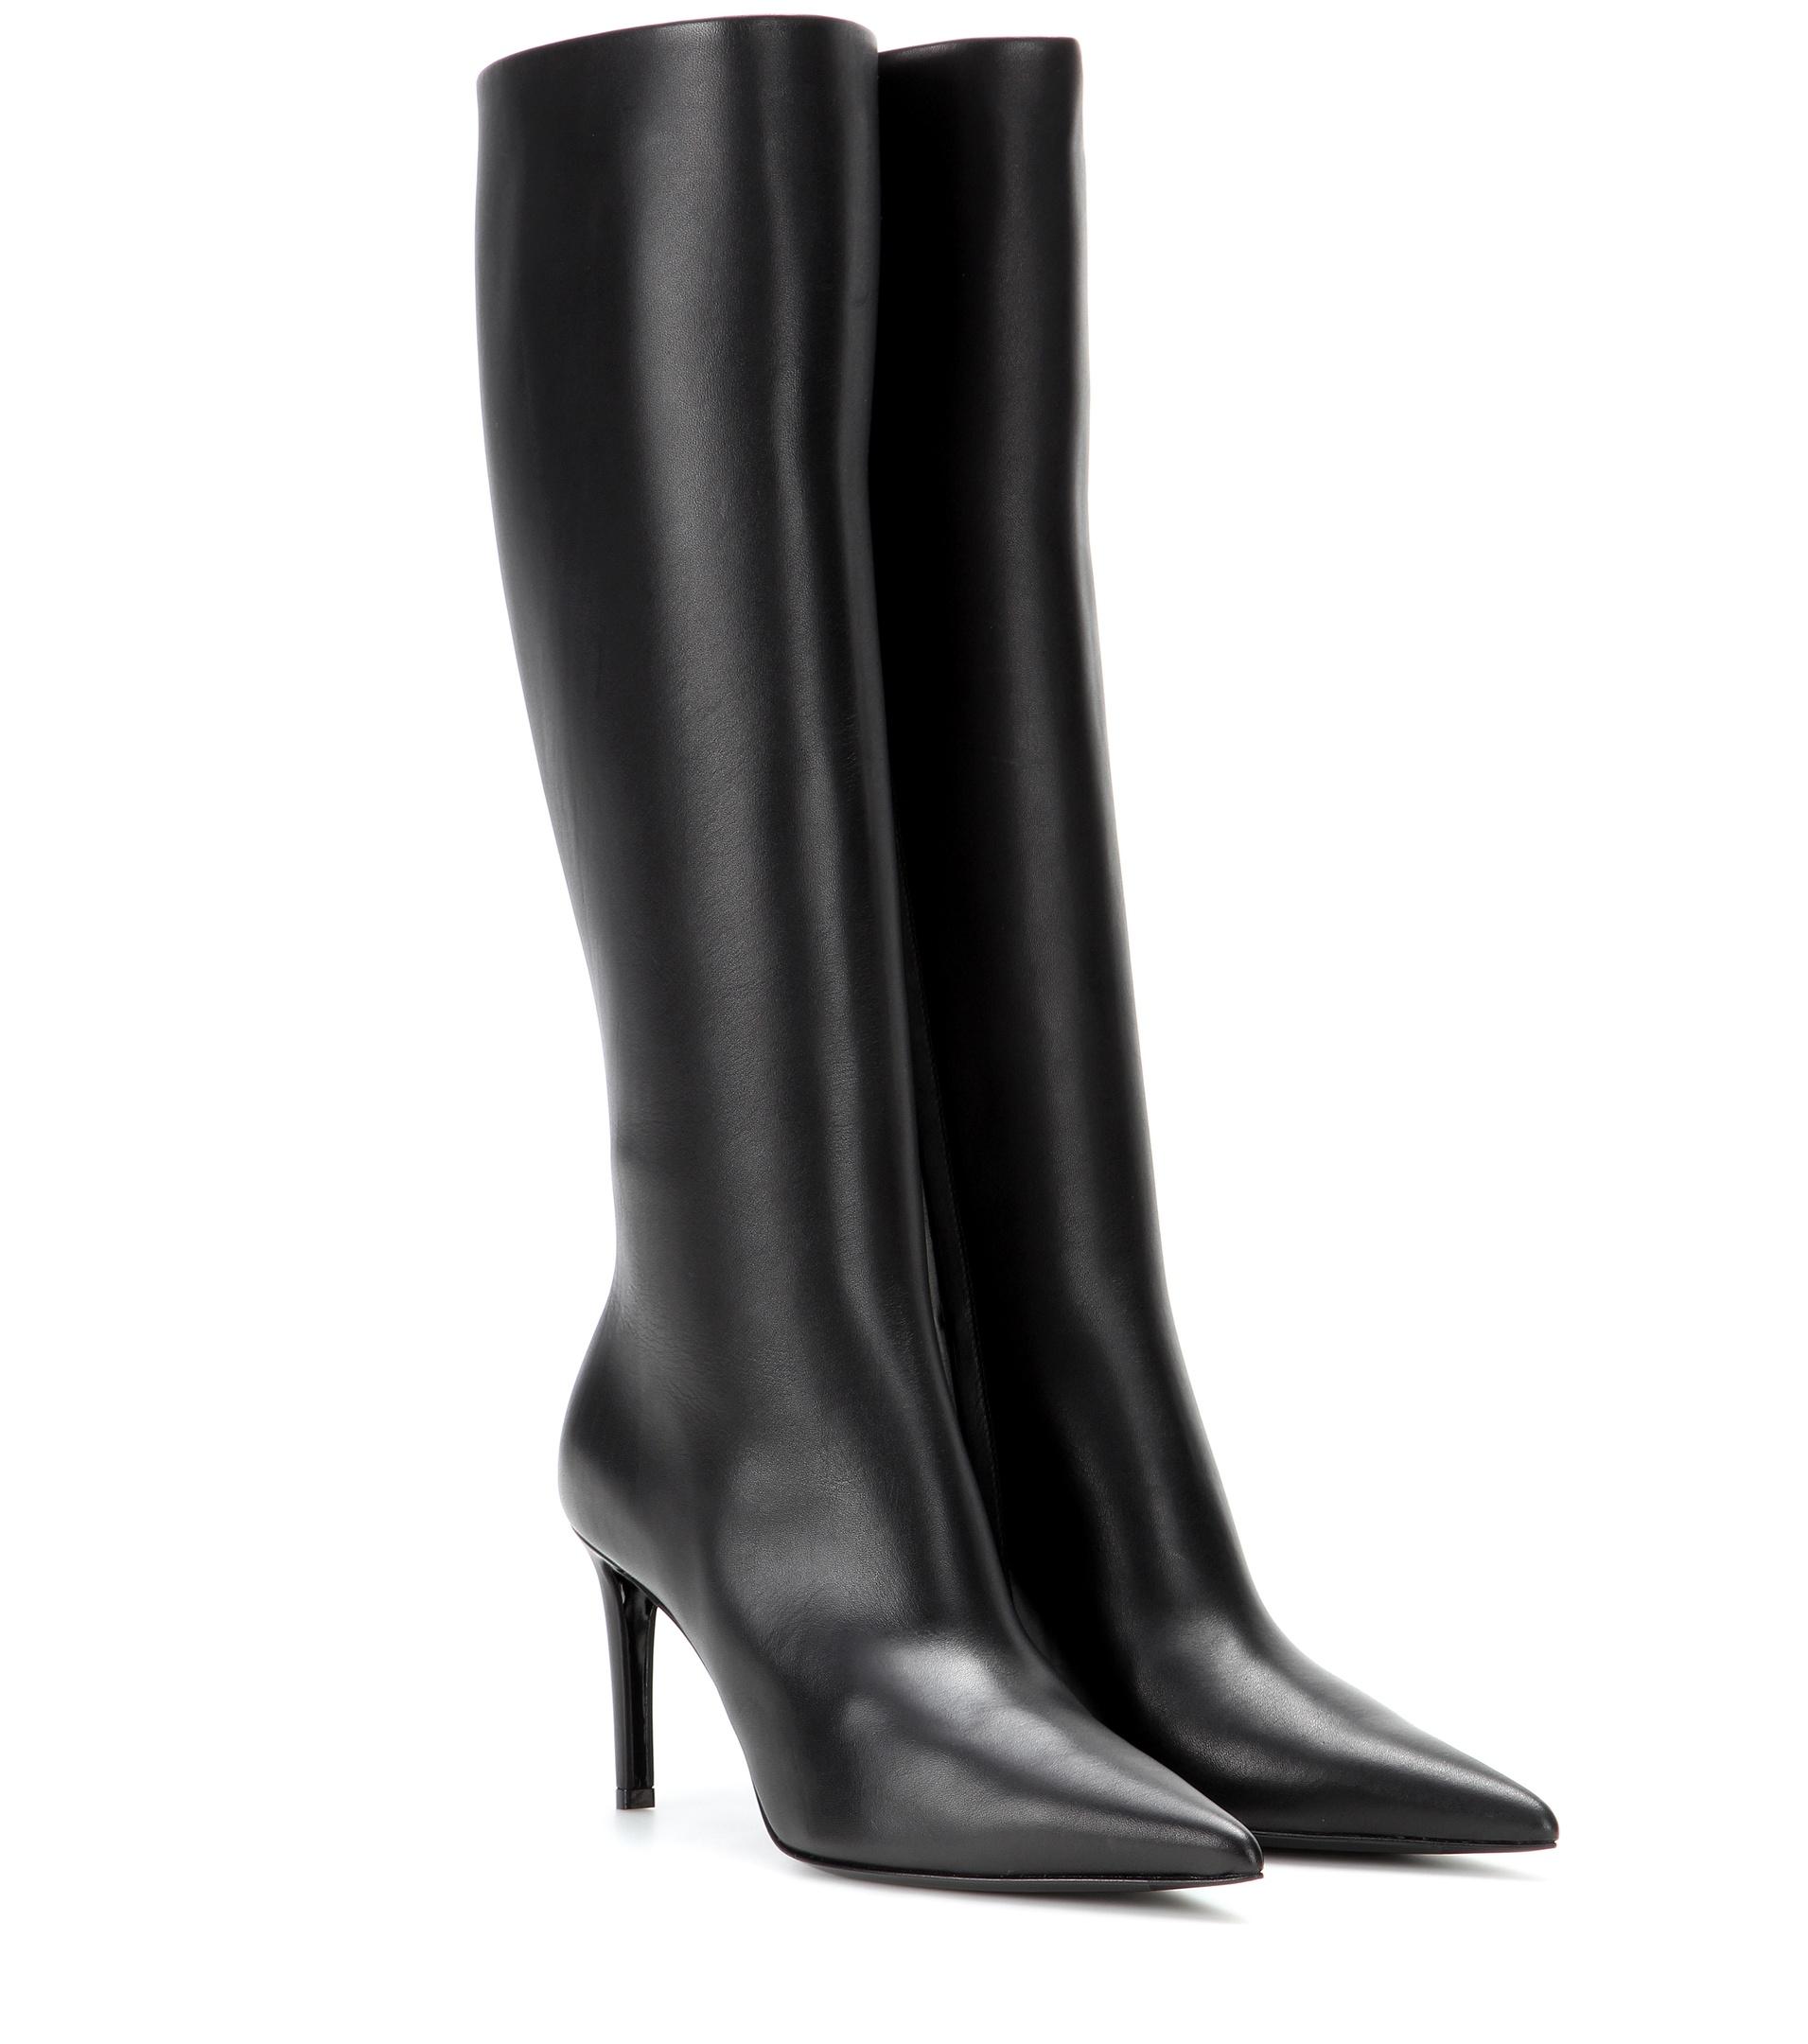 Balenciaga Leather Knee-High Boots in Black | Lyst